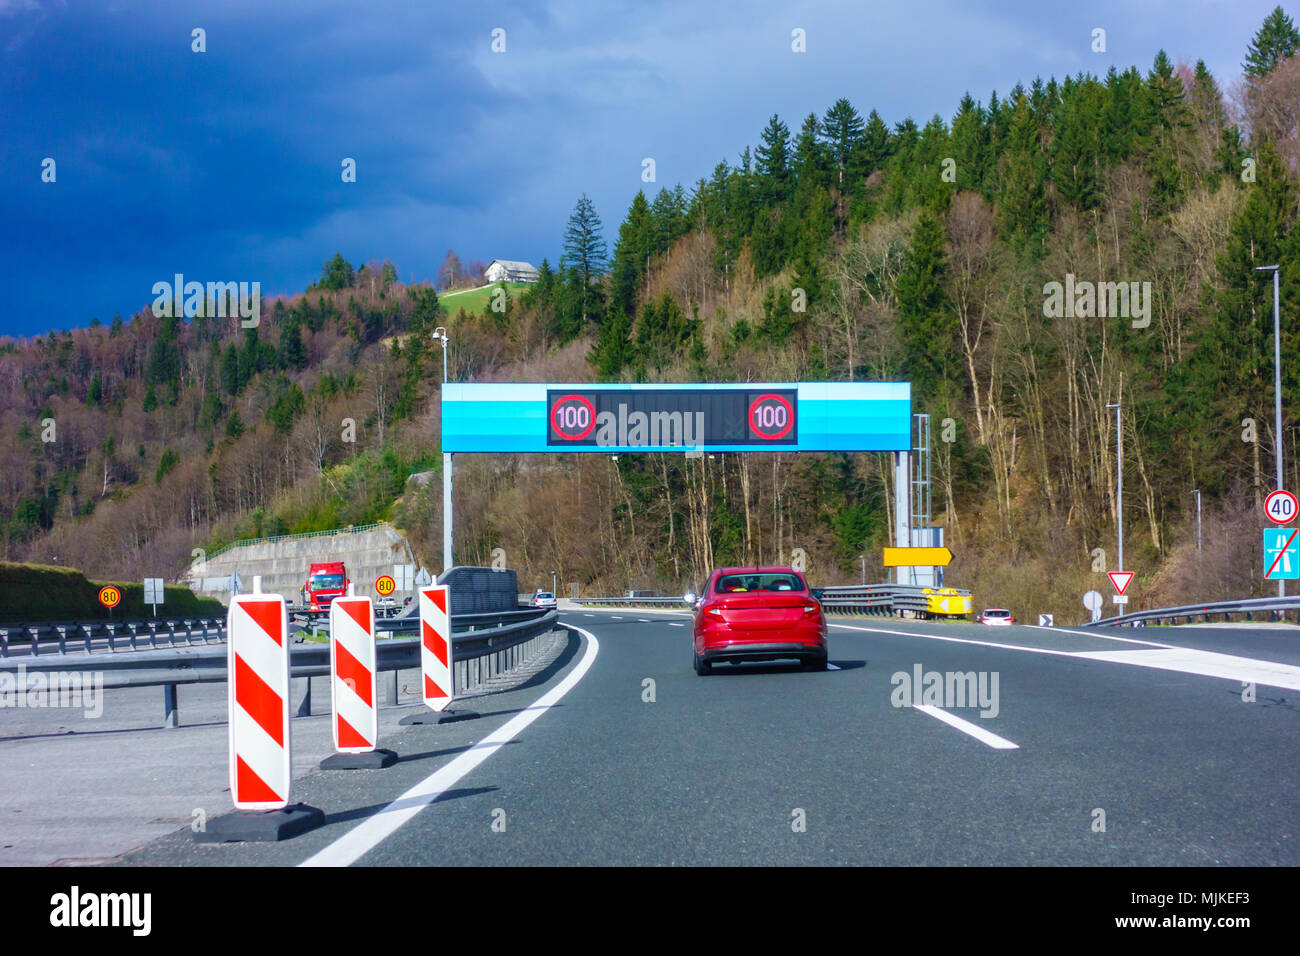 Modern LED traffic signs on highway, red car, truck on road Stock Photo